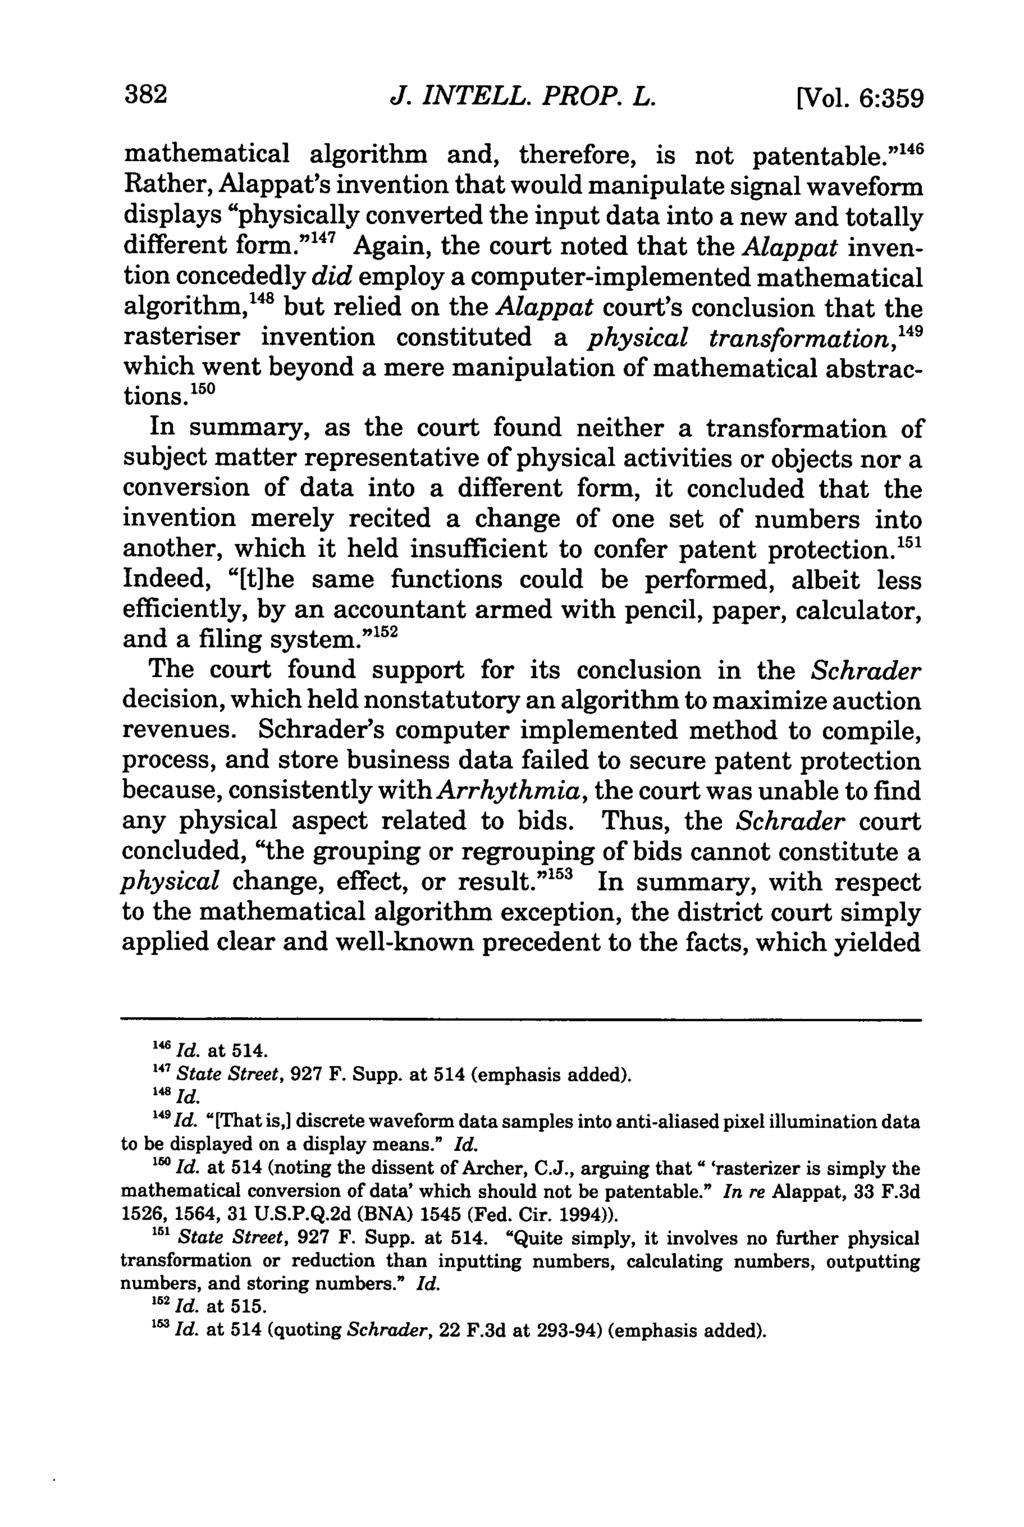 382 Journal of Intellectual Property Law, Vol. 6, Iss. 2 [1999], Art. 6 J. INTELL. PROP. L. [Vol. 6:359 mathematical algorithm and, therefore, is not patentable.